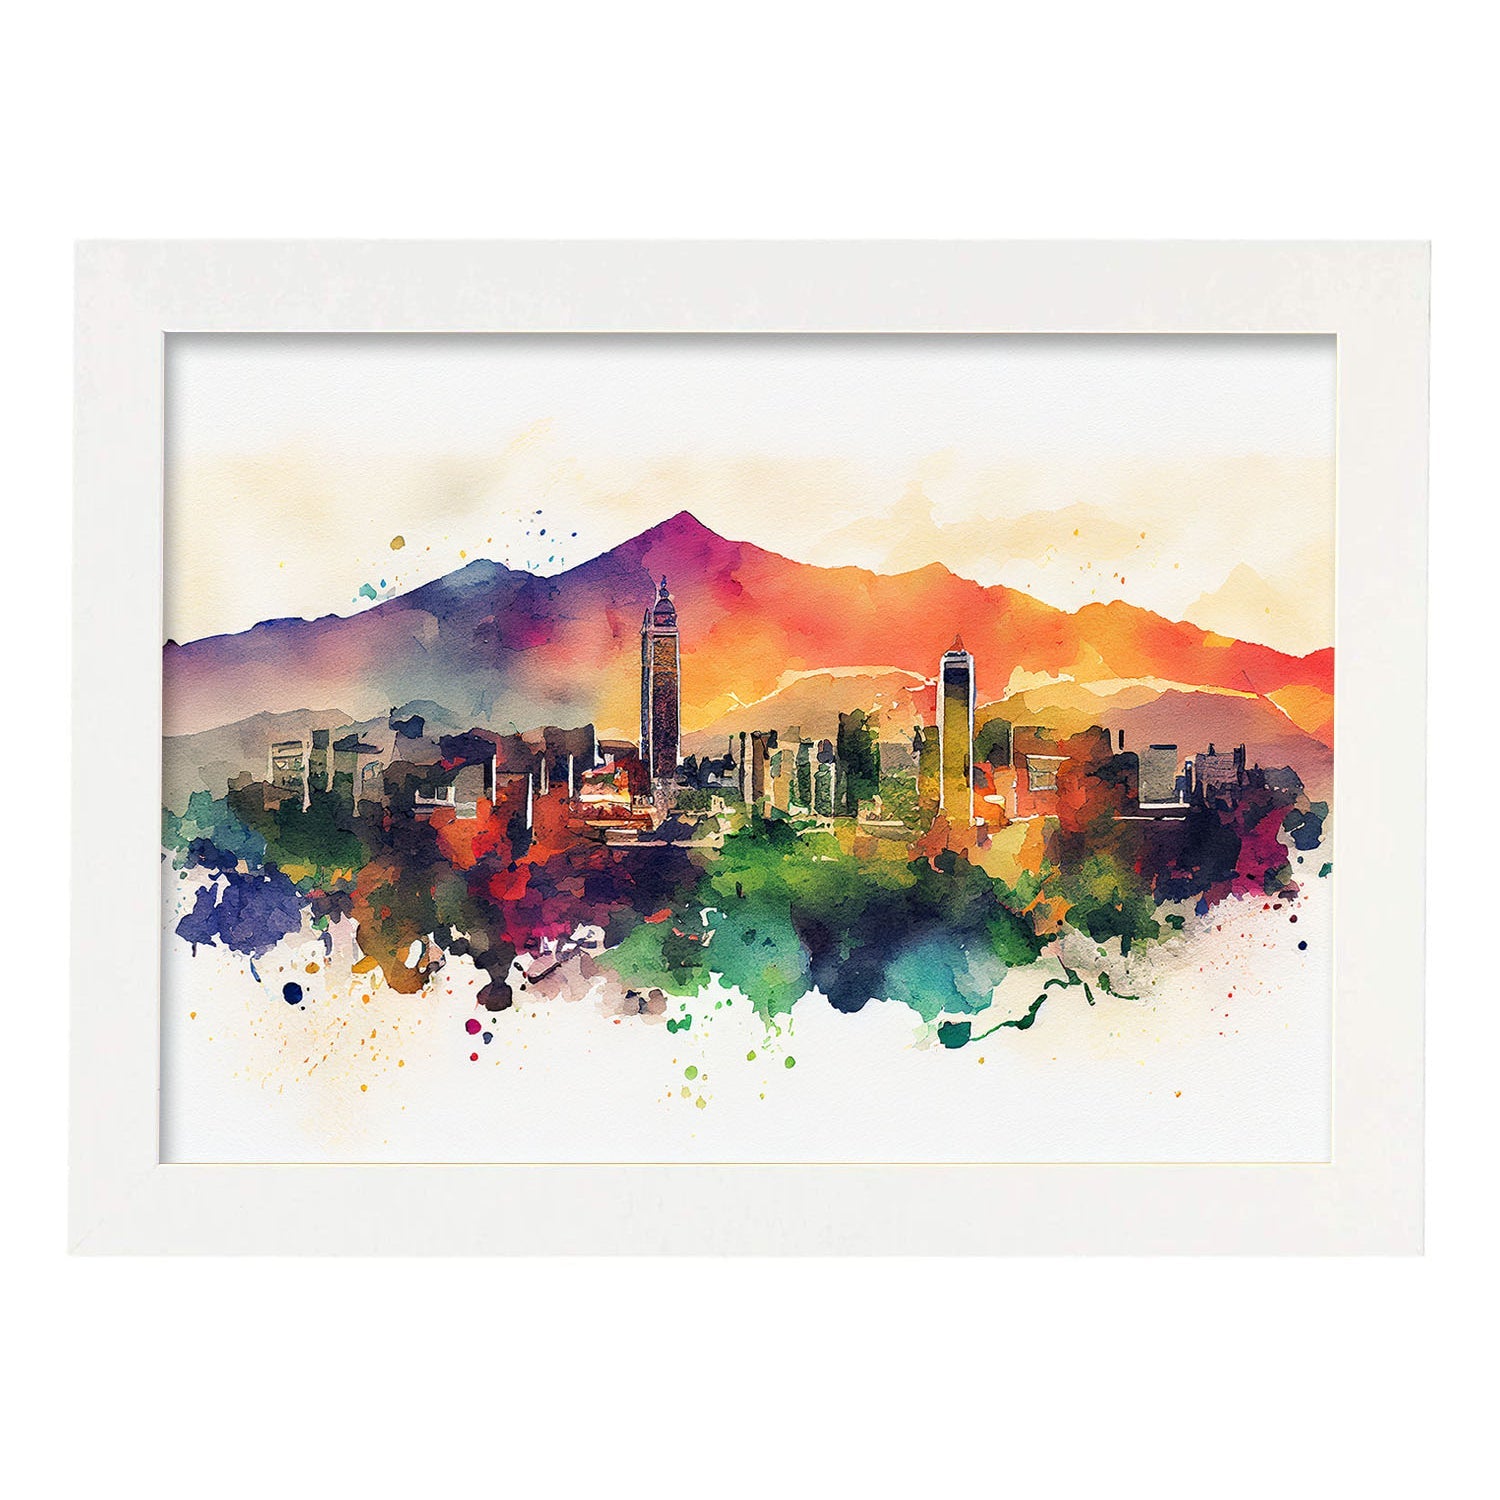 Nacnic watercolor of a skyline of the city of Santiago. Aesthetic Wall Art Prints for Bedroom or Living Room Design.-Artwork-Nacnic-A4-Marco Blanco-Nacnic Estudio SL